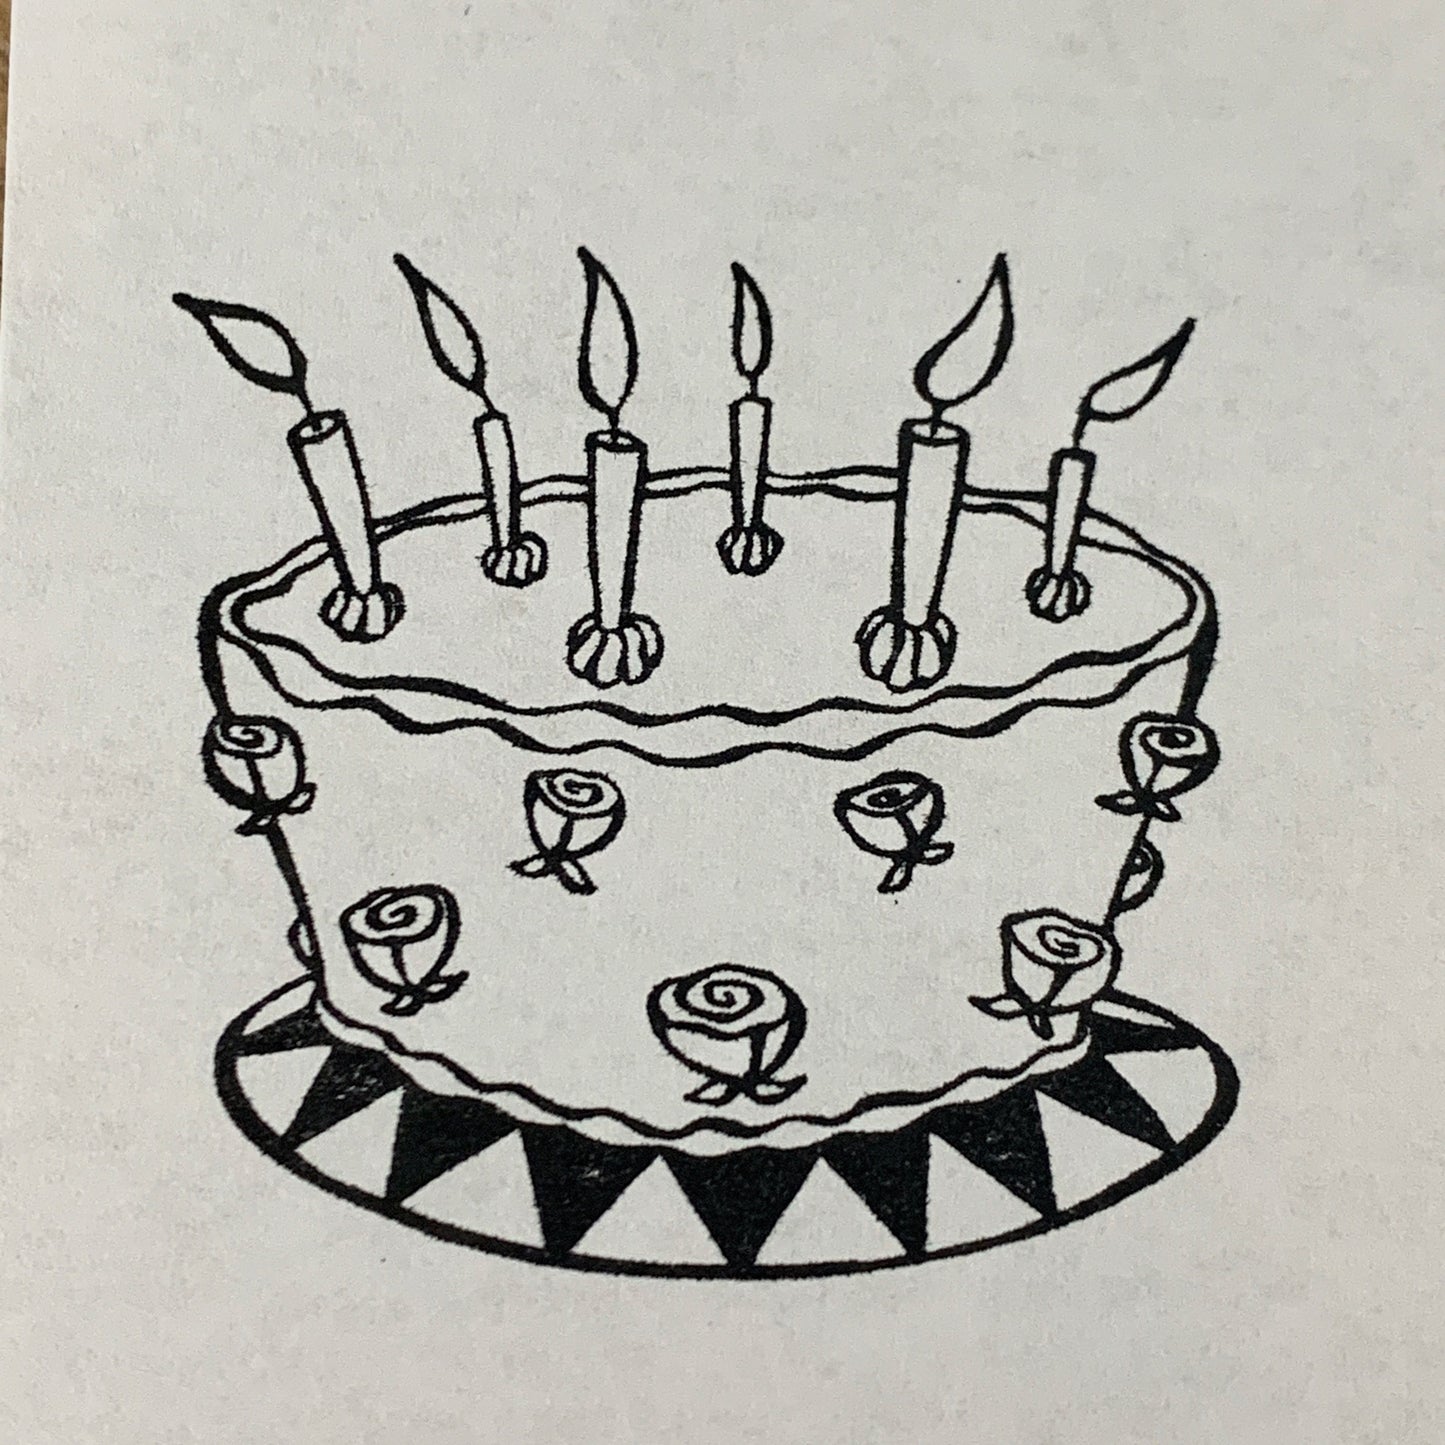 Birthday Cake Rubber Stamp Paper Craft Supply, Wacky Cake Rubber Stampede Wood Mounted Stamp